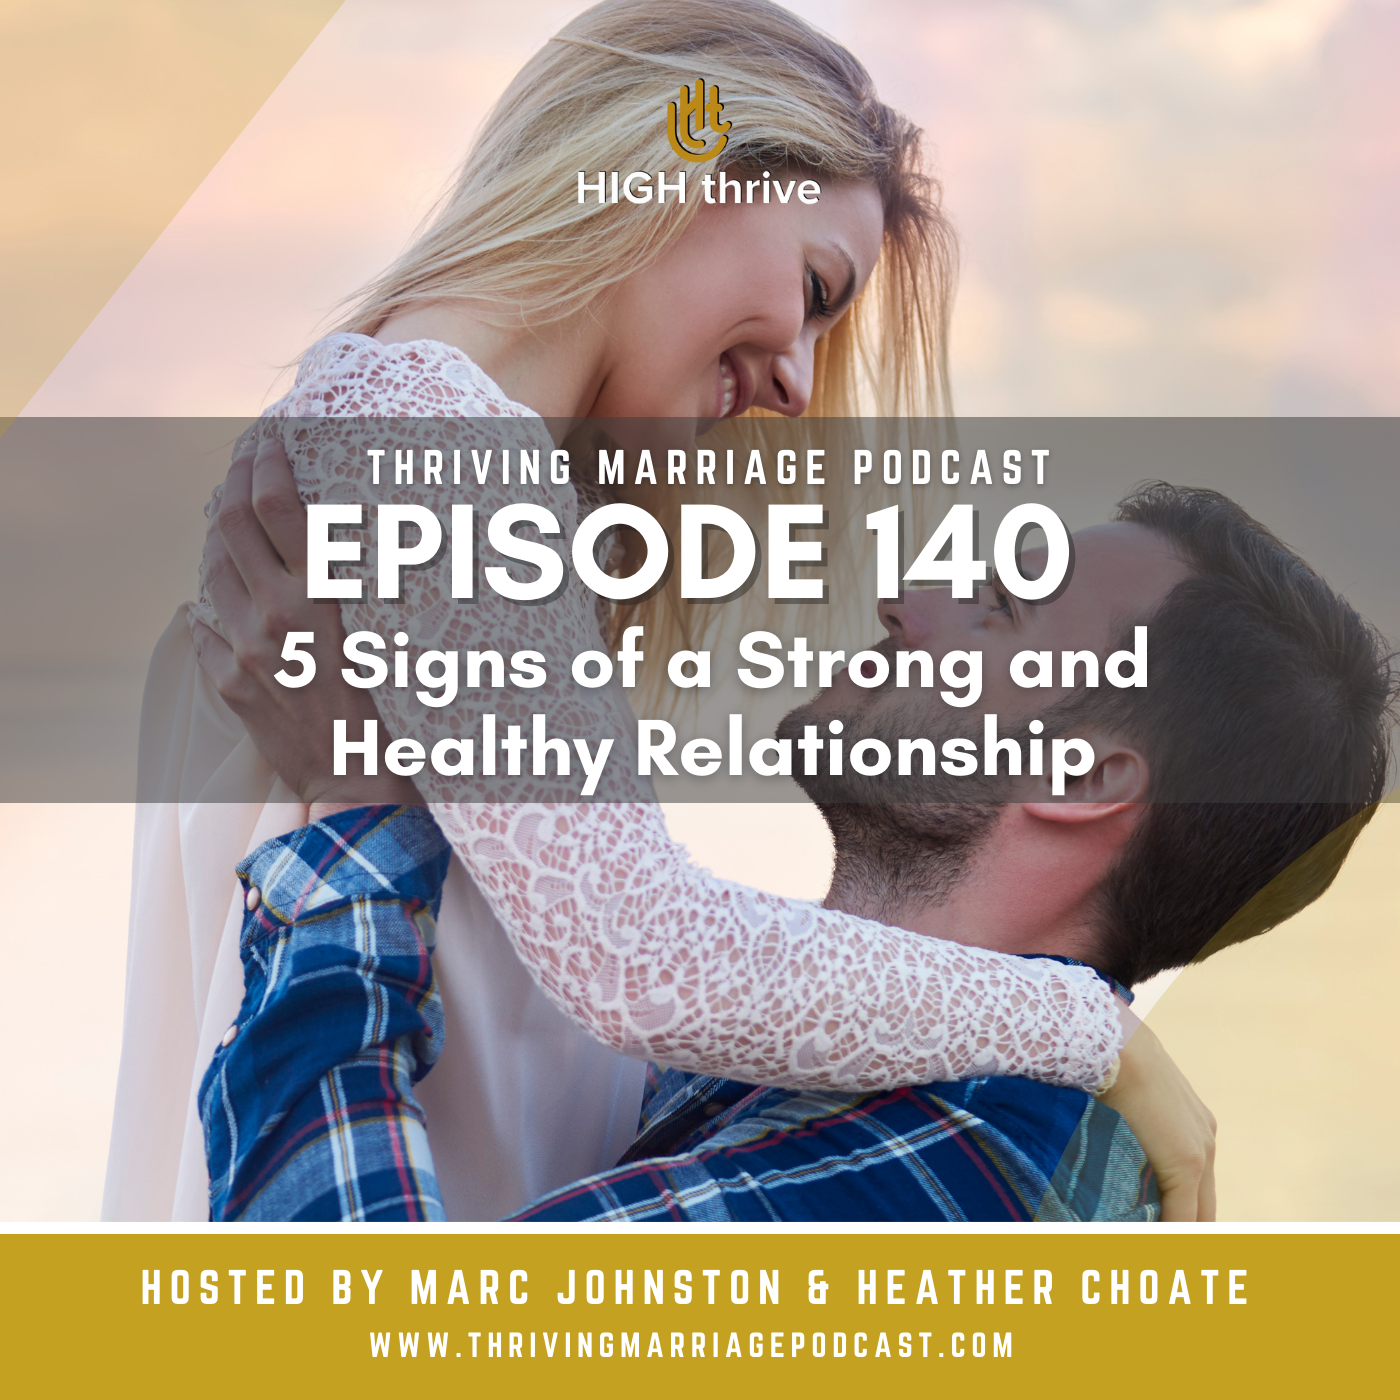 Episode 140: 5 Signs of a Strong and Healthy Relationship